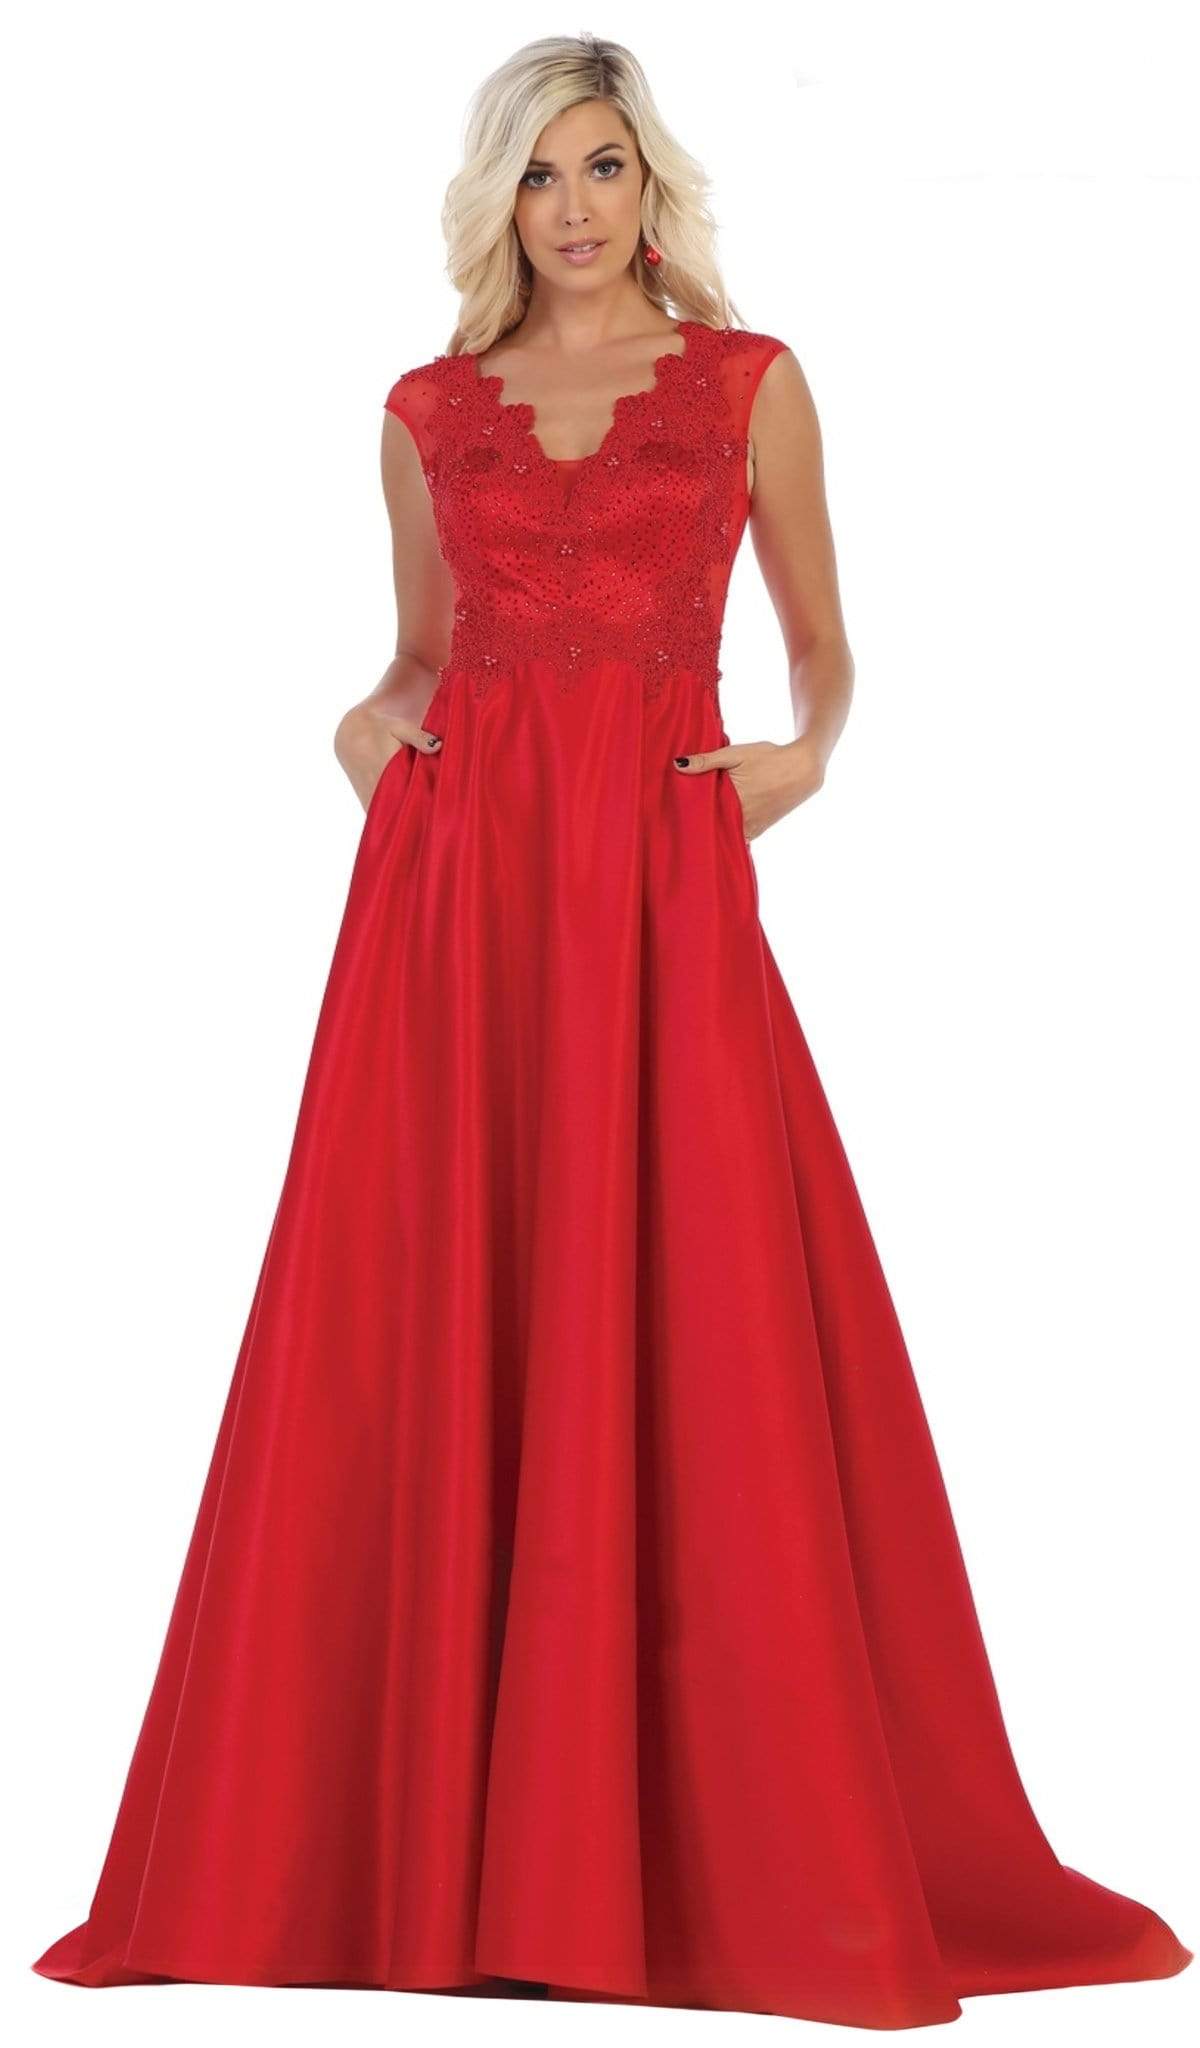 May Queen - RQ7723 Beaded Lace A-Line Evening Gown Special Occasion Dress 4 / Red